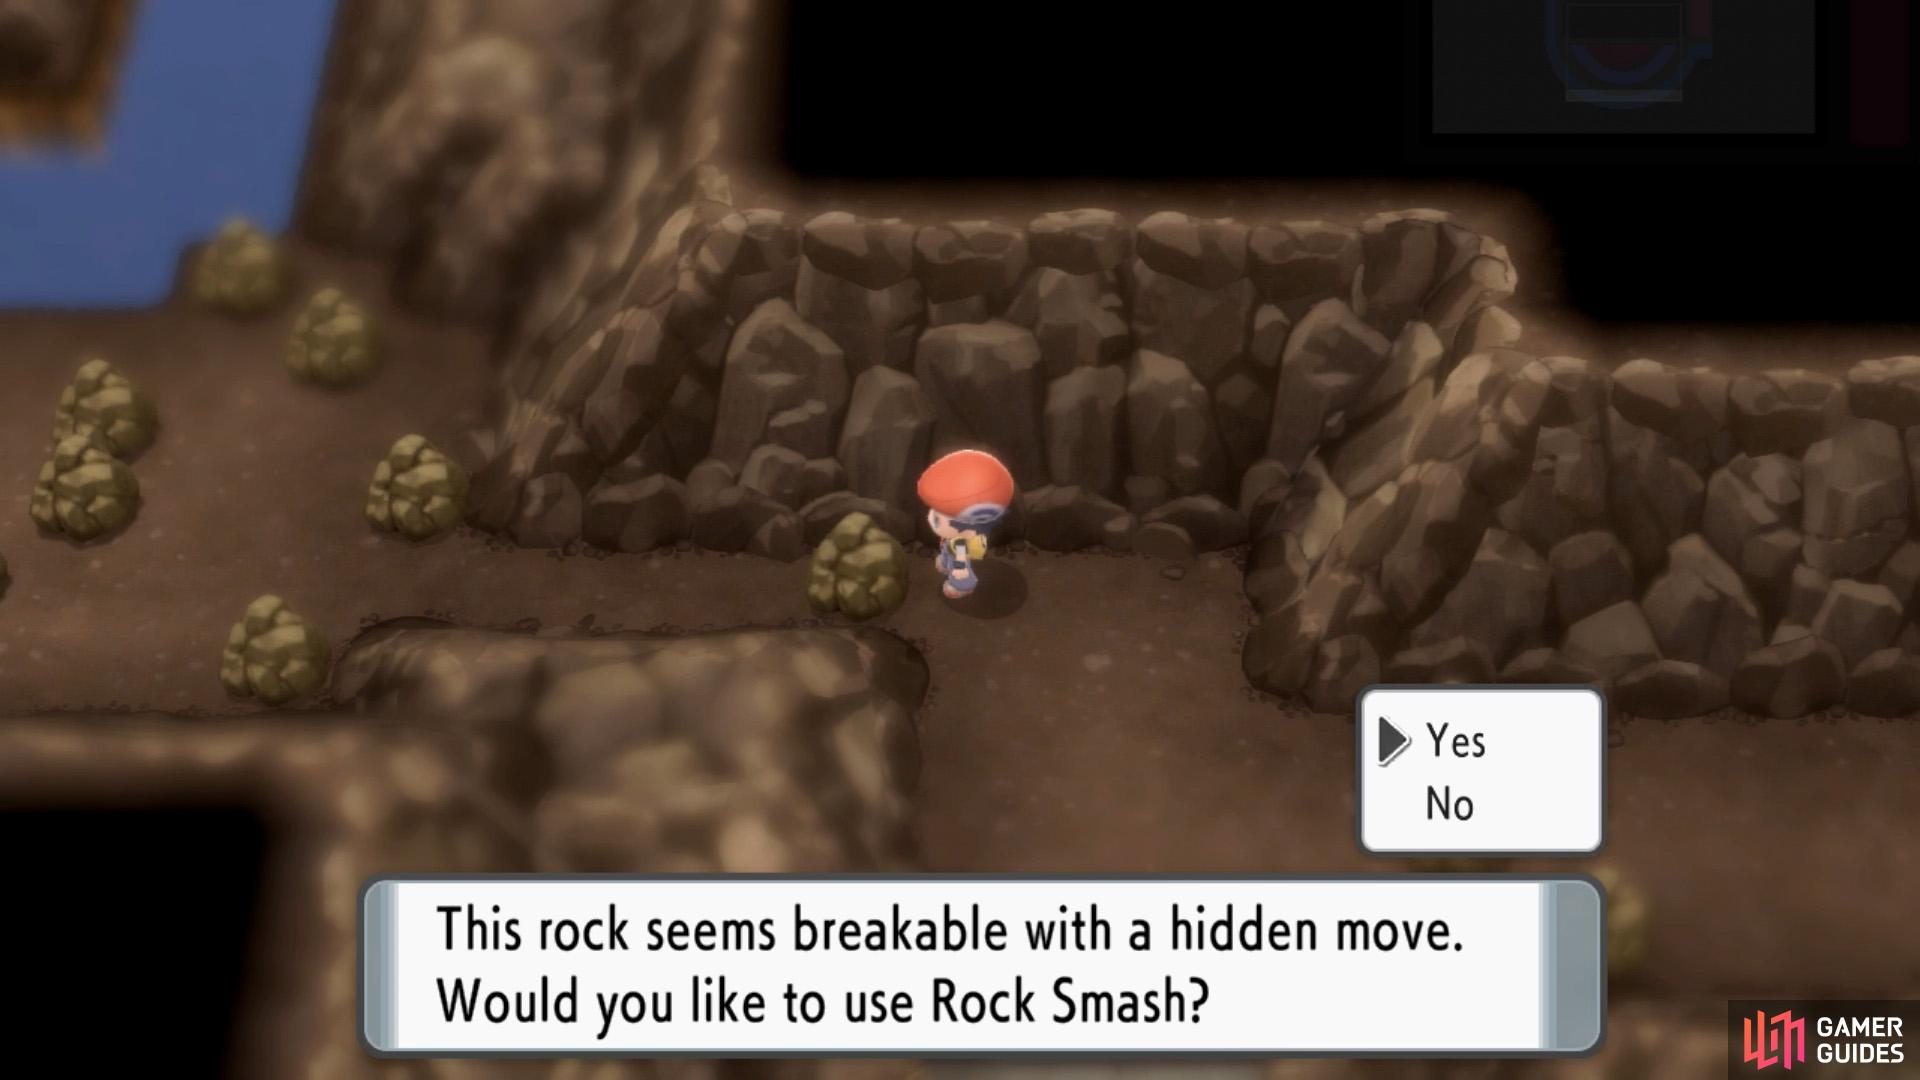 You need to use Rock Smash to get rid of these rocks.